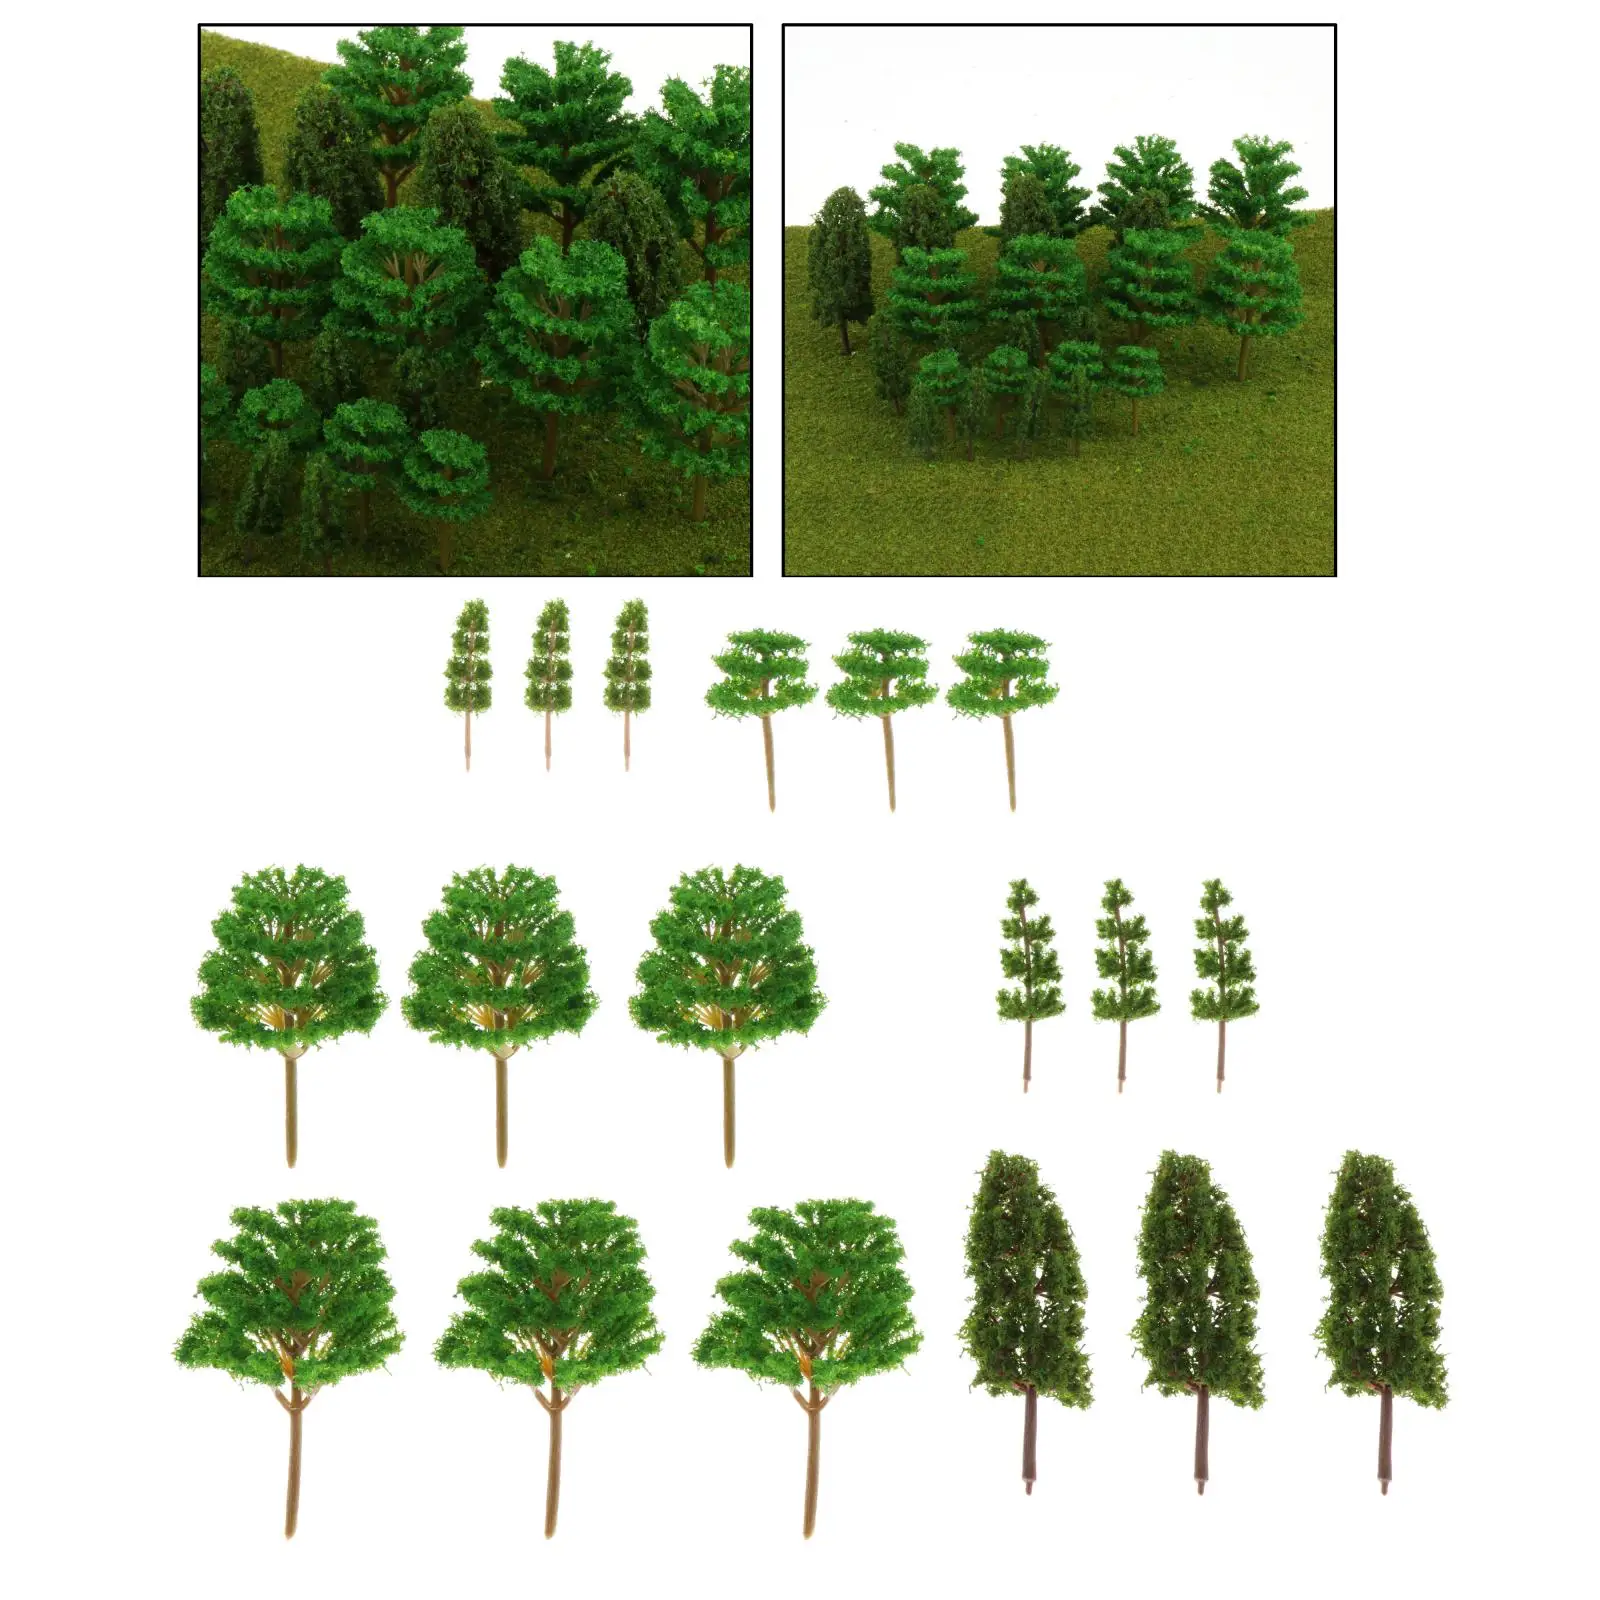 Artifical Tree,Artifical Plant,Fake Trees for Outdoor and Indoor,10Pcs/Pack Dark Green Model Trees Scale Train Park Railroad Railway Layout Scenery Scene 3cm-5cm 4cm10Pcs 